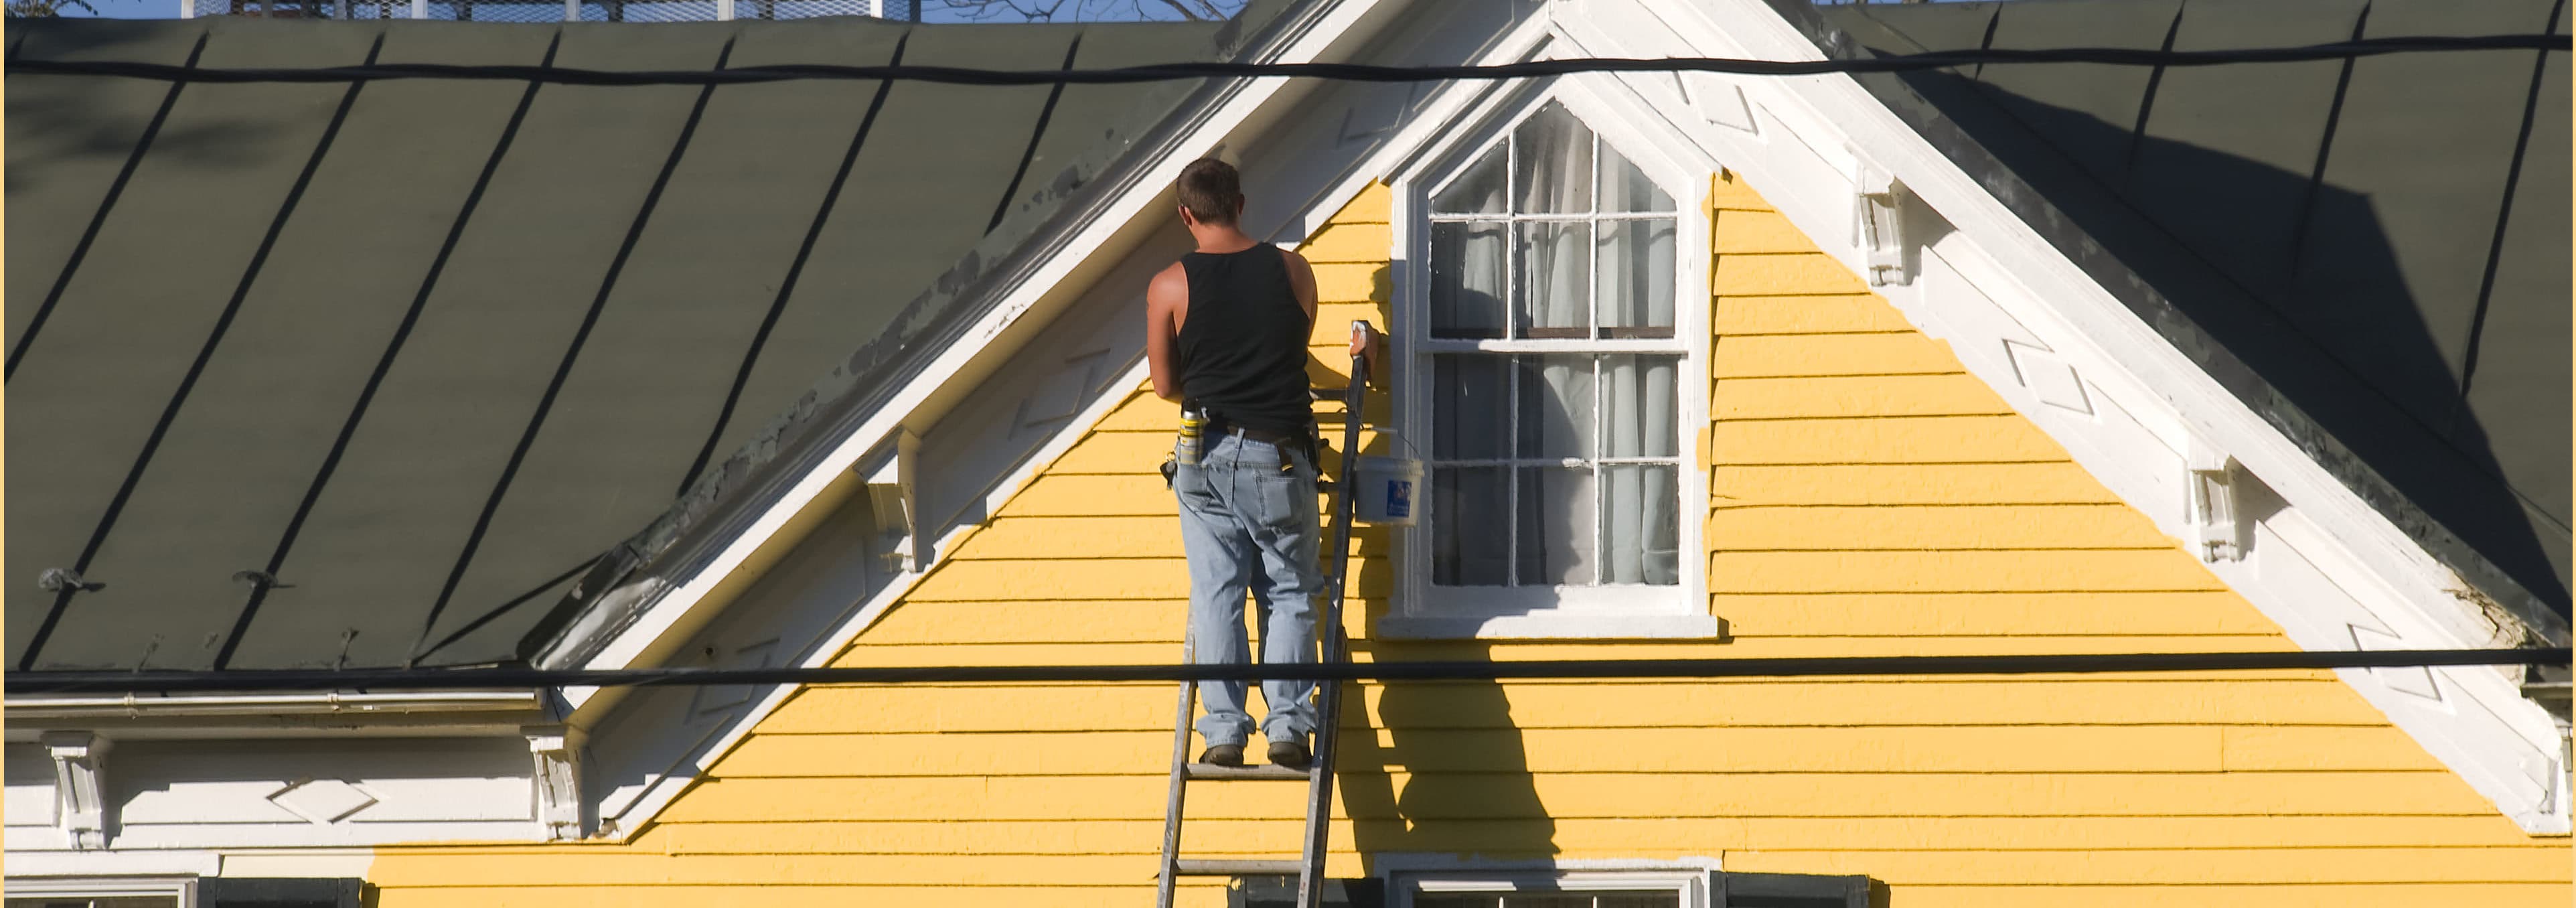 WHAT FACTORS AFFECT A PAINTING CONTRACTOR’S FEES?